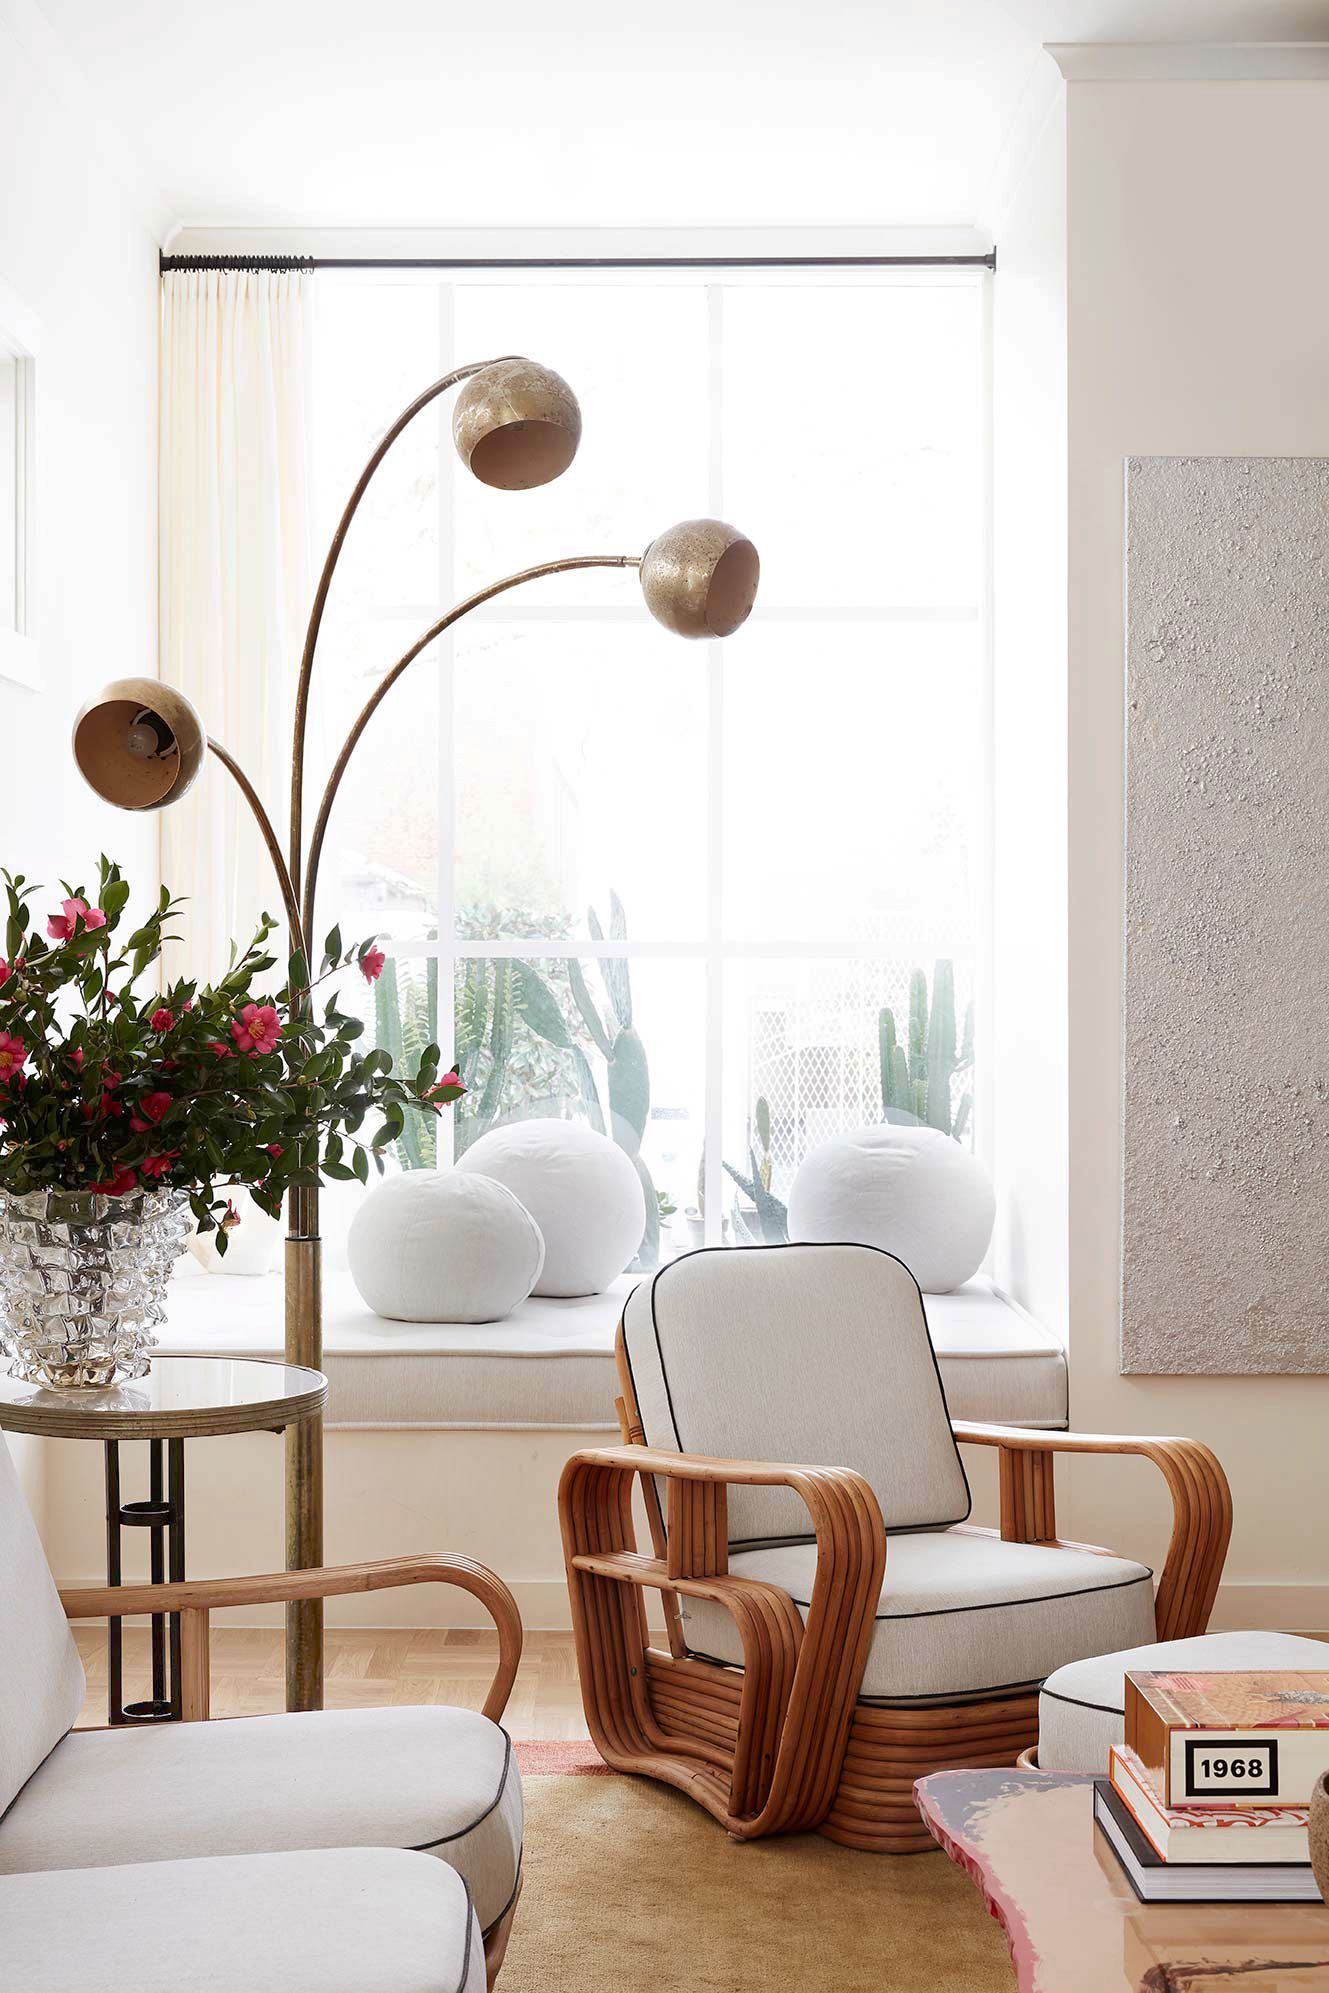 30 Stylish Corner Decoration Ideas, What Can I Put In A Dining Room Corner